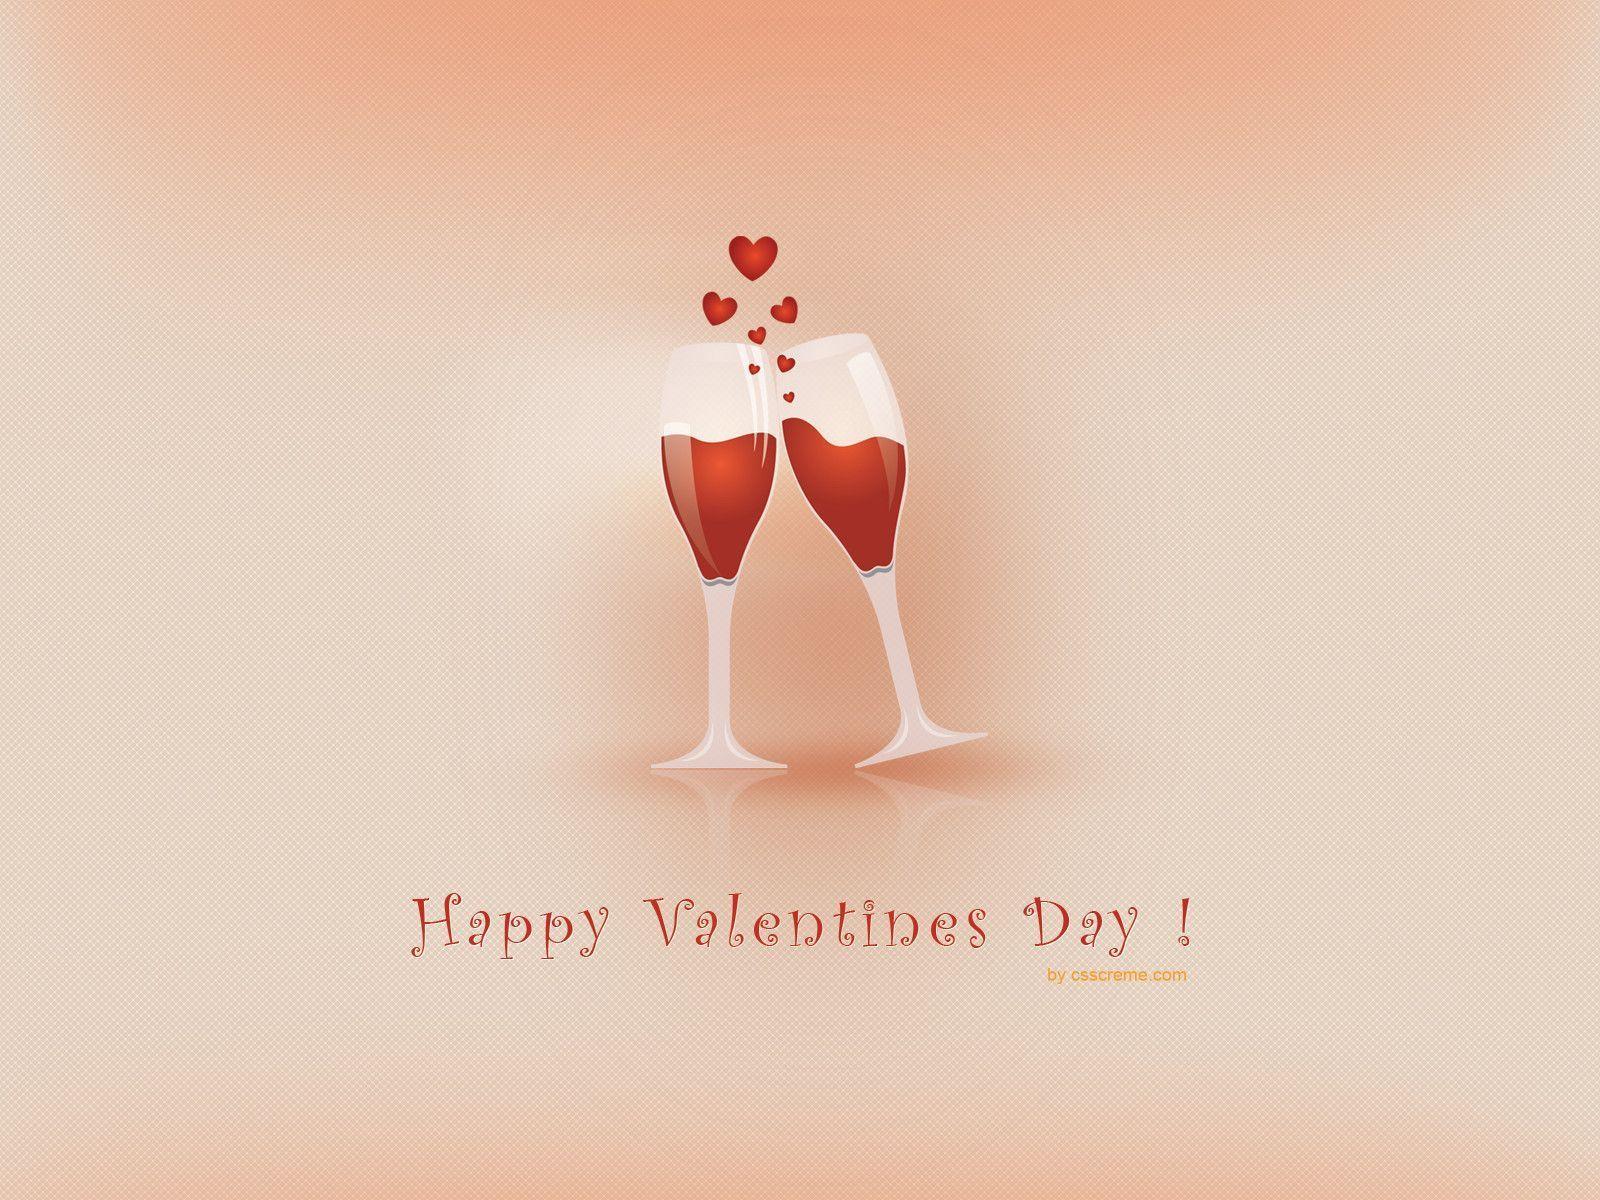 Beatifull Valentines Day 2015 Wallpapers with heart and Rose